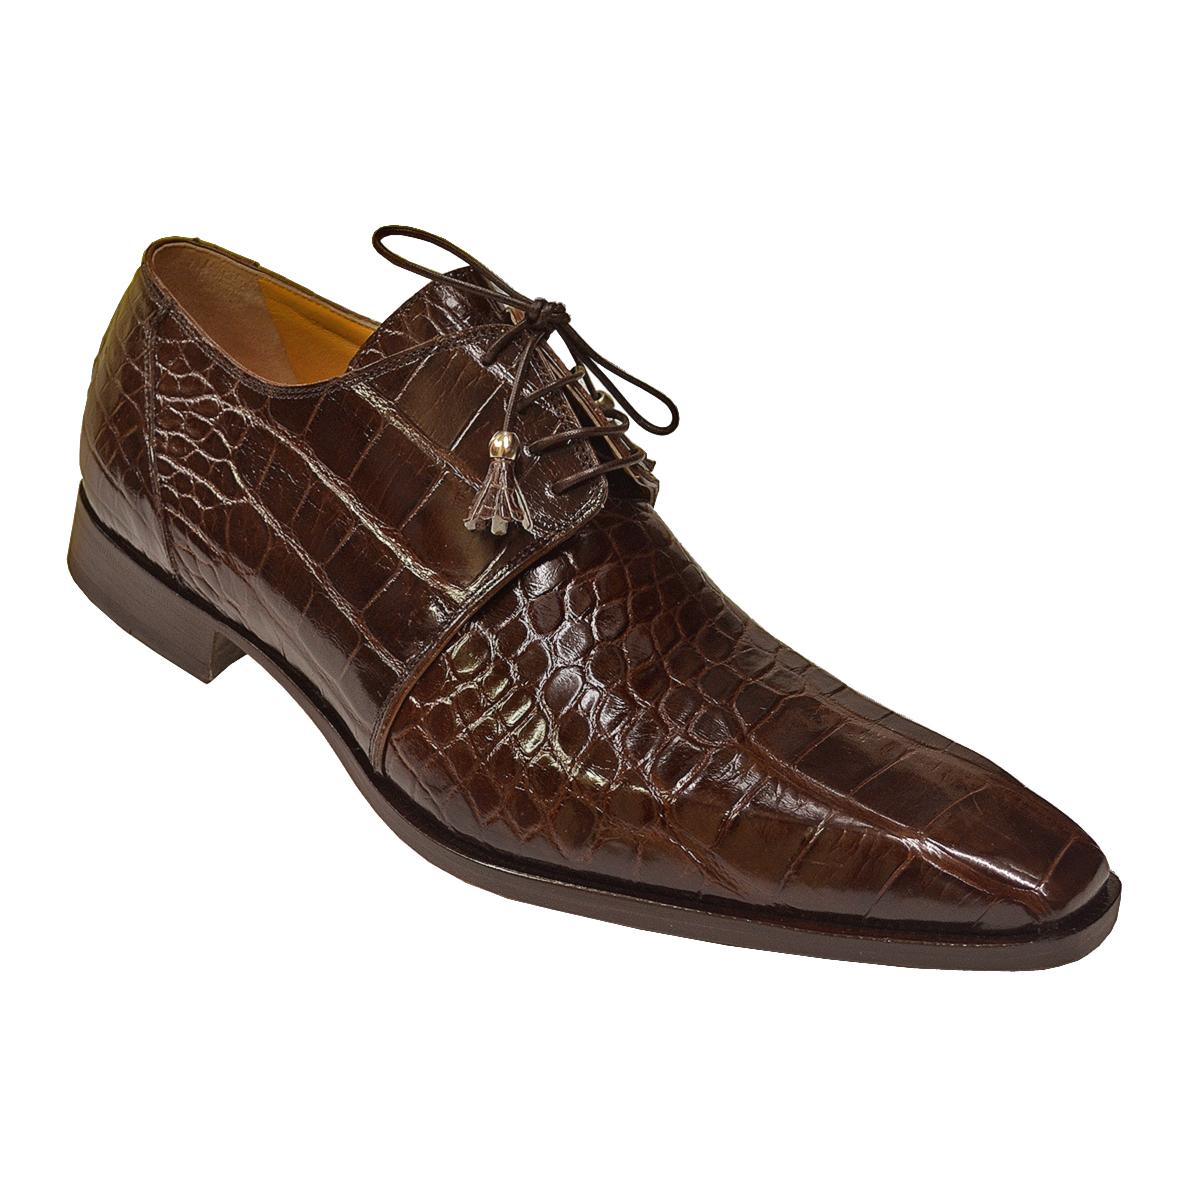 Mauri 53156 Brown Genuine All-Over Alligator Belly Skin Shoes - $699.90 ...